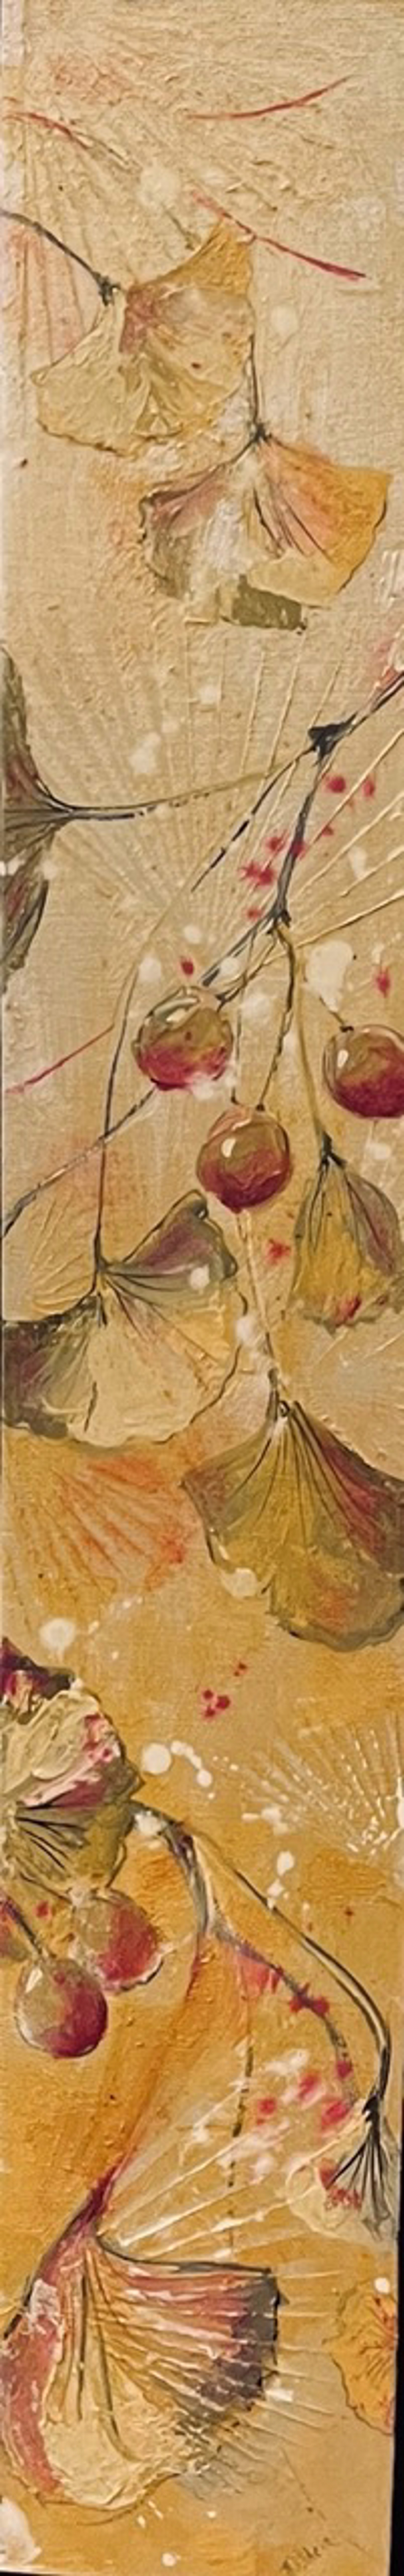 Gingko/Cranberry & Gold by Bonnie Dhein